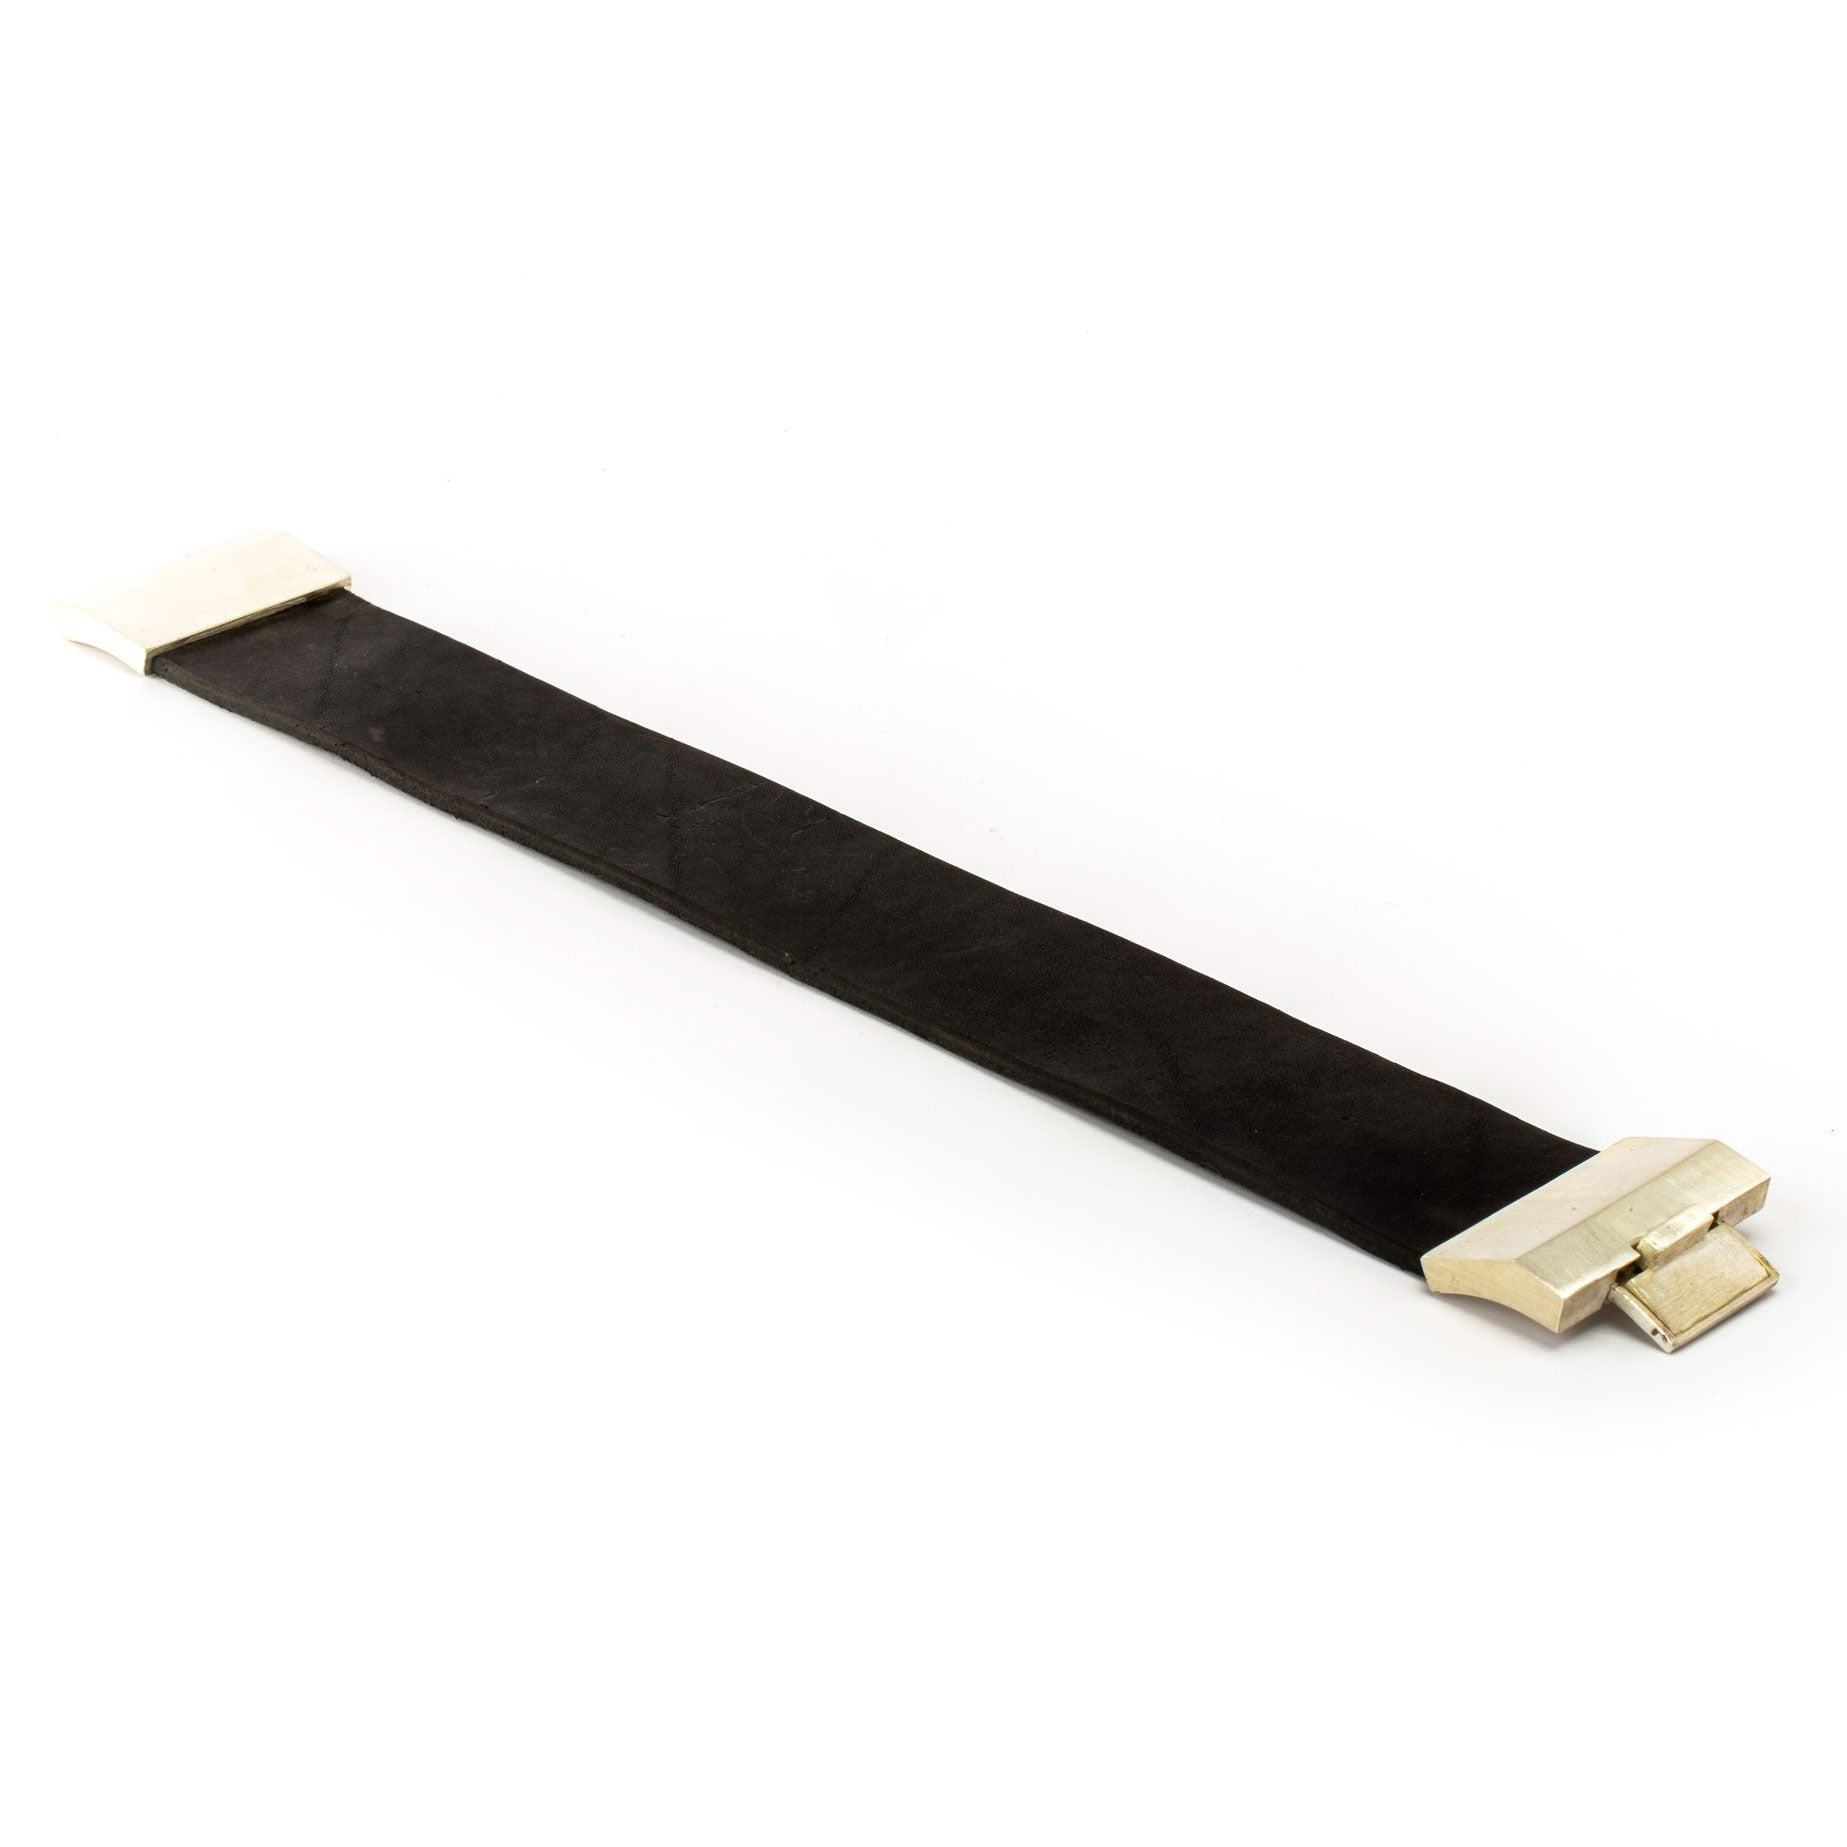 Box lock leather choker by Parts of 4 - silver plated brass & leather